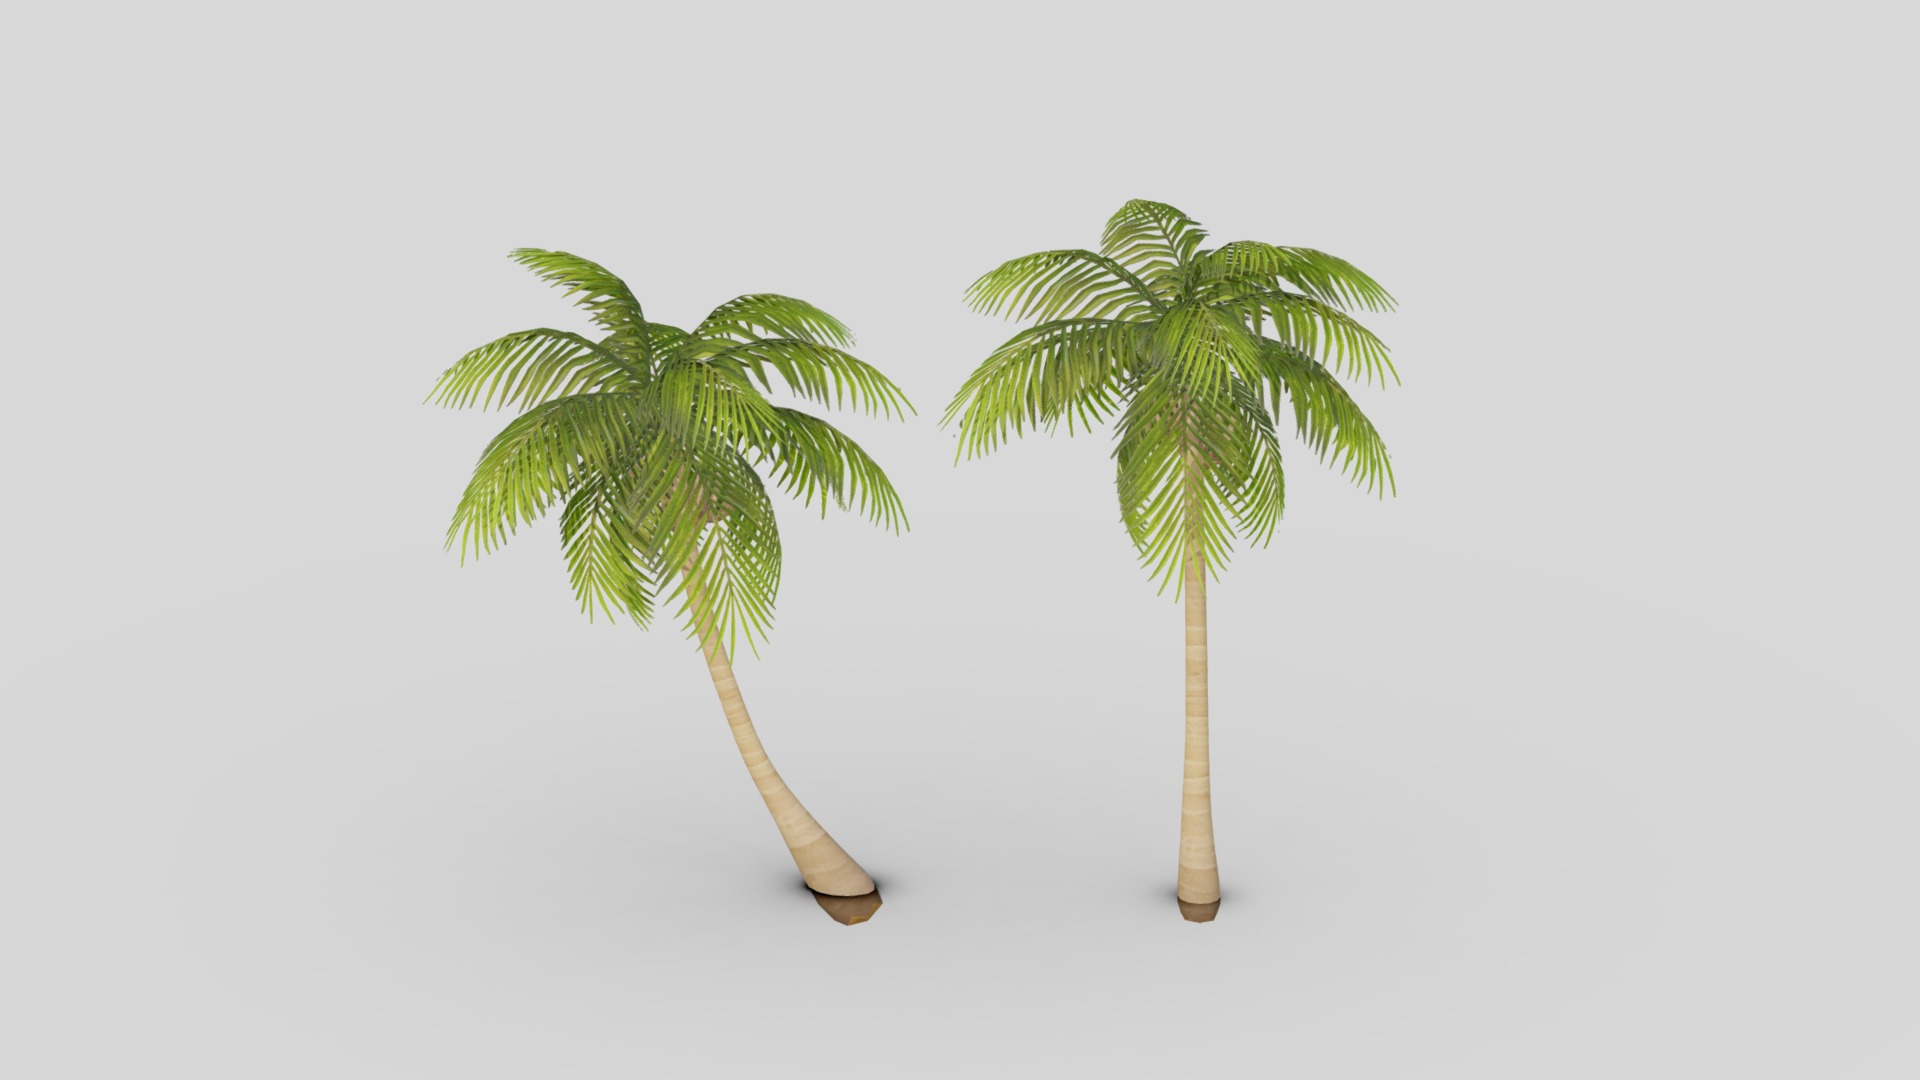 3D model Coconut Tree LOD Low-poly G11 - This is a 3D model of the Coconut Tree LOD Low-poly G11. The 3D model is about two palm trees with leaves.